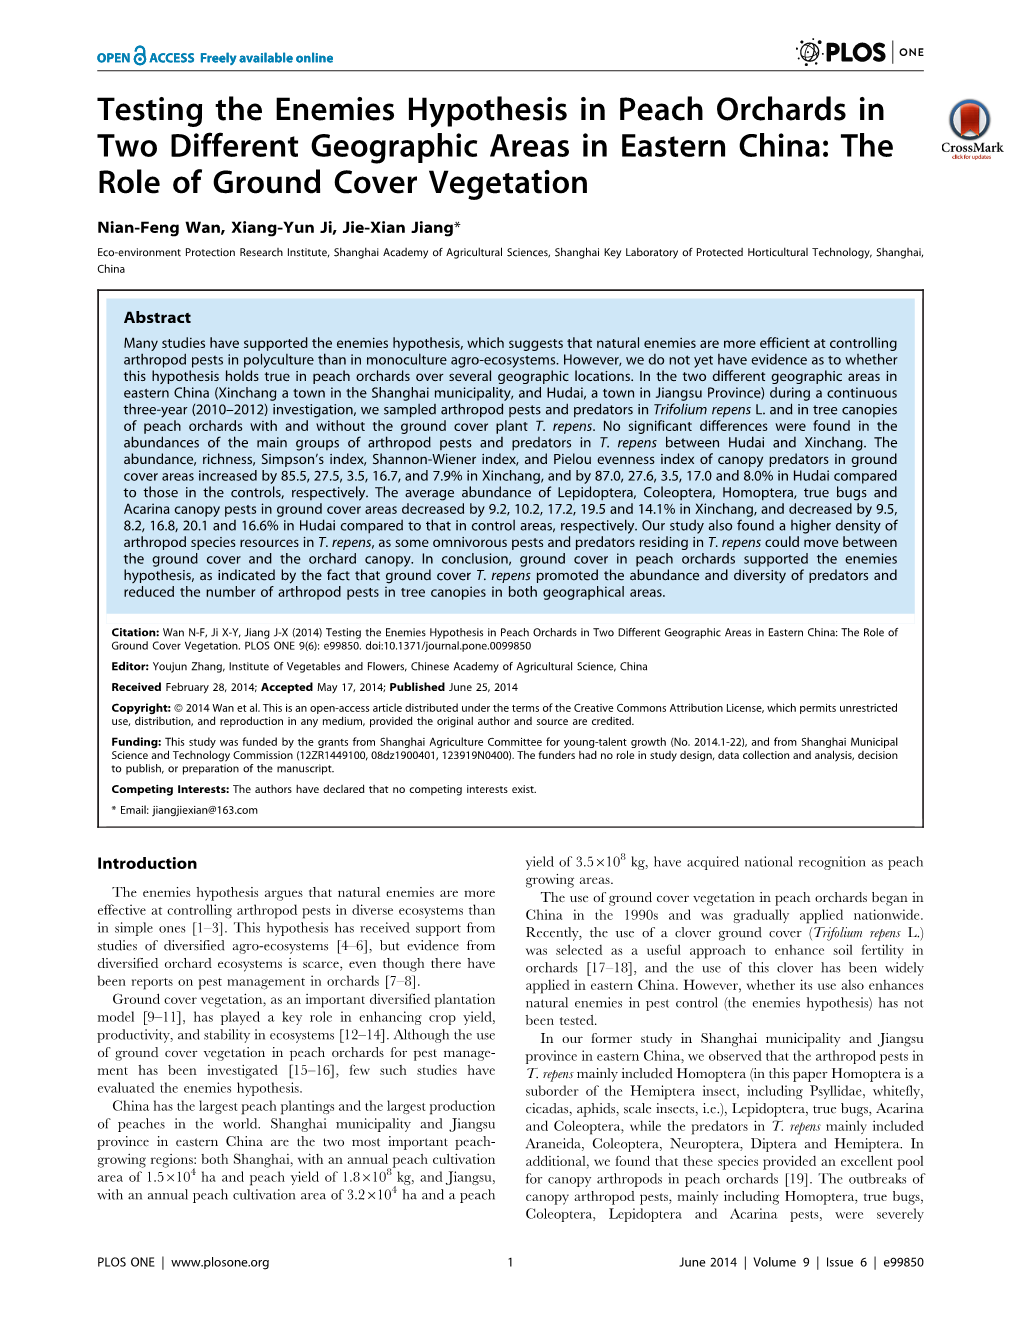 The Role of Ground Cover Vegetation